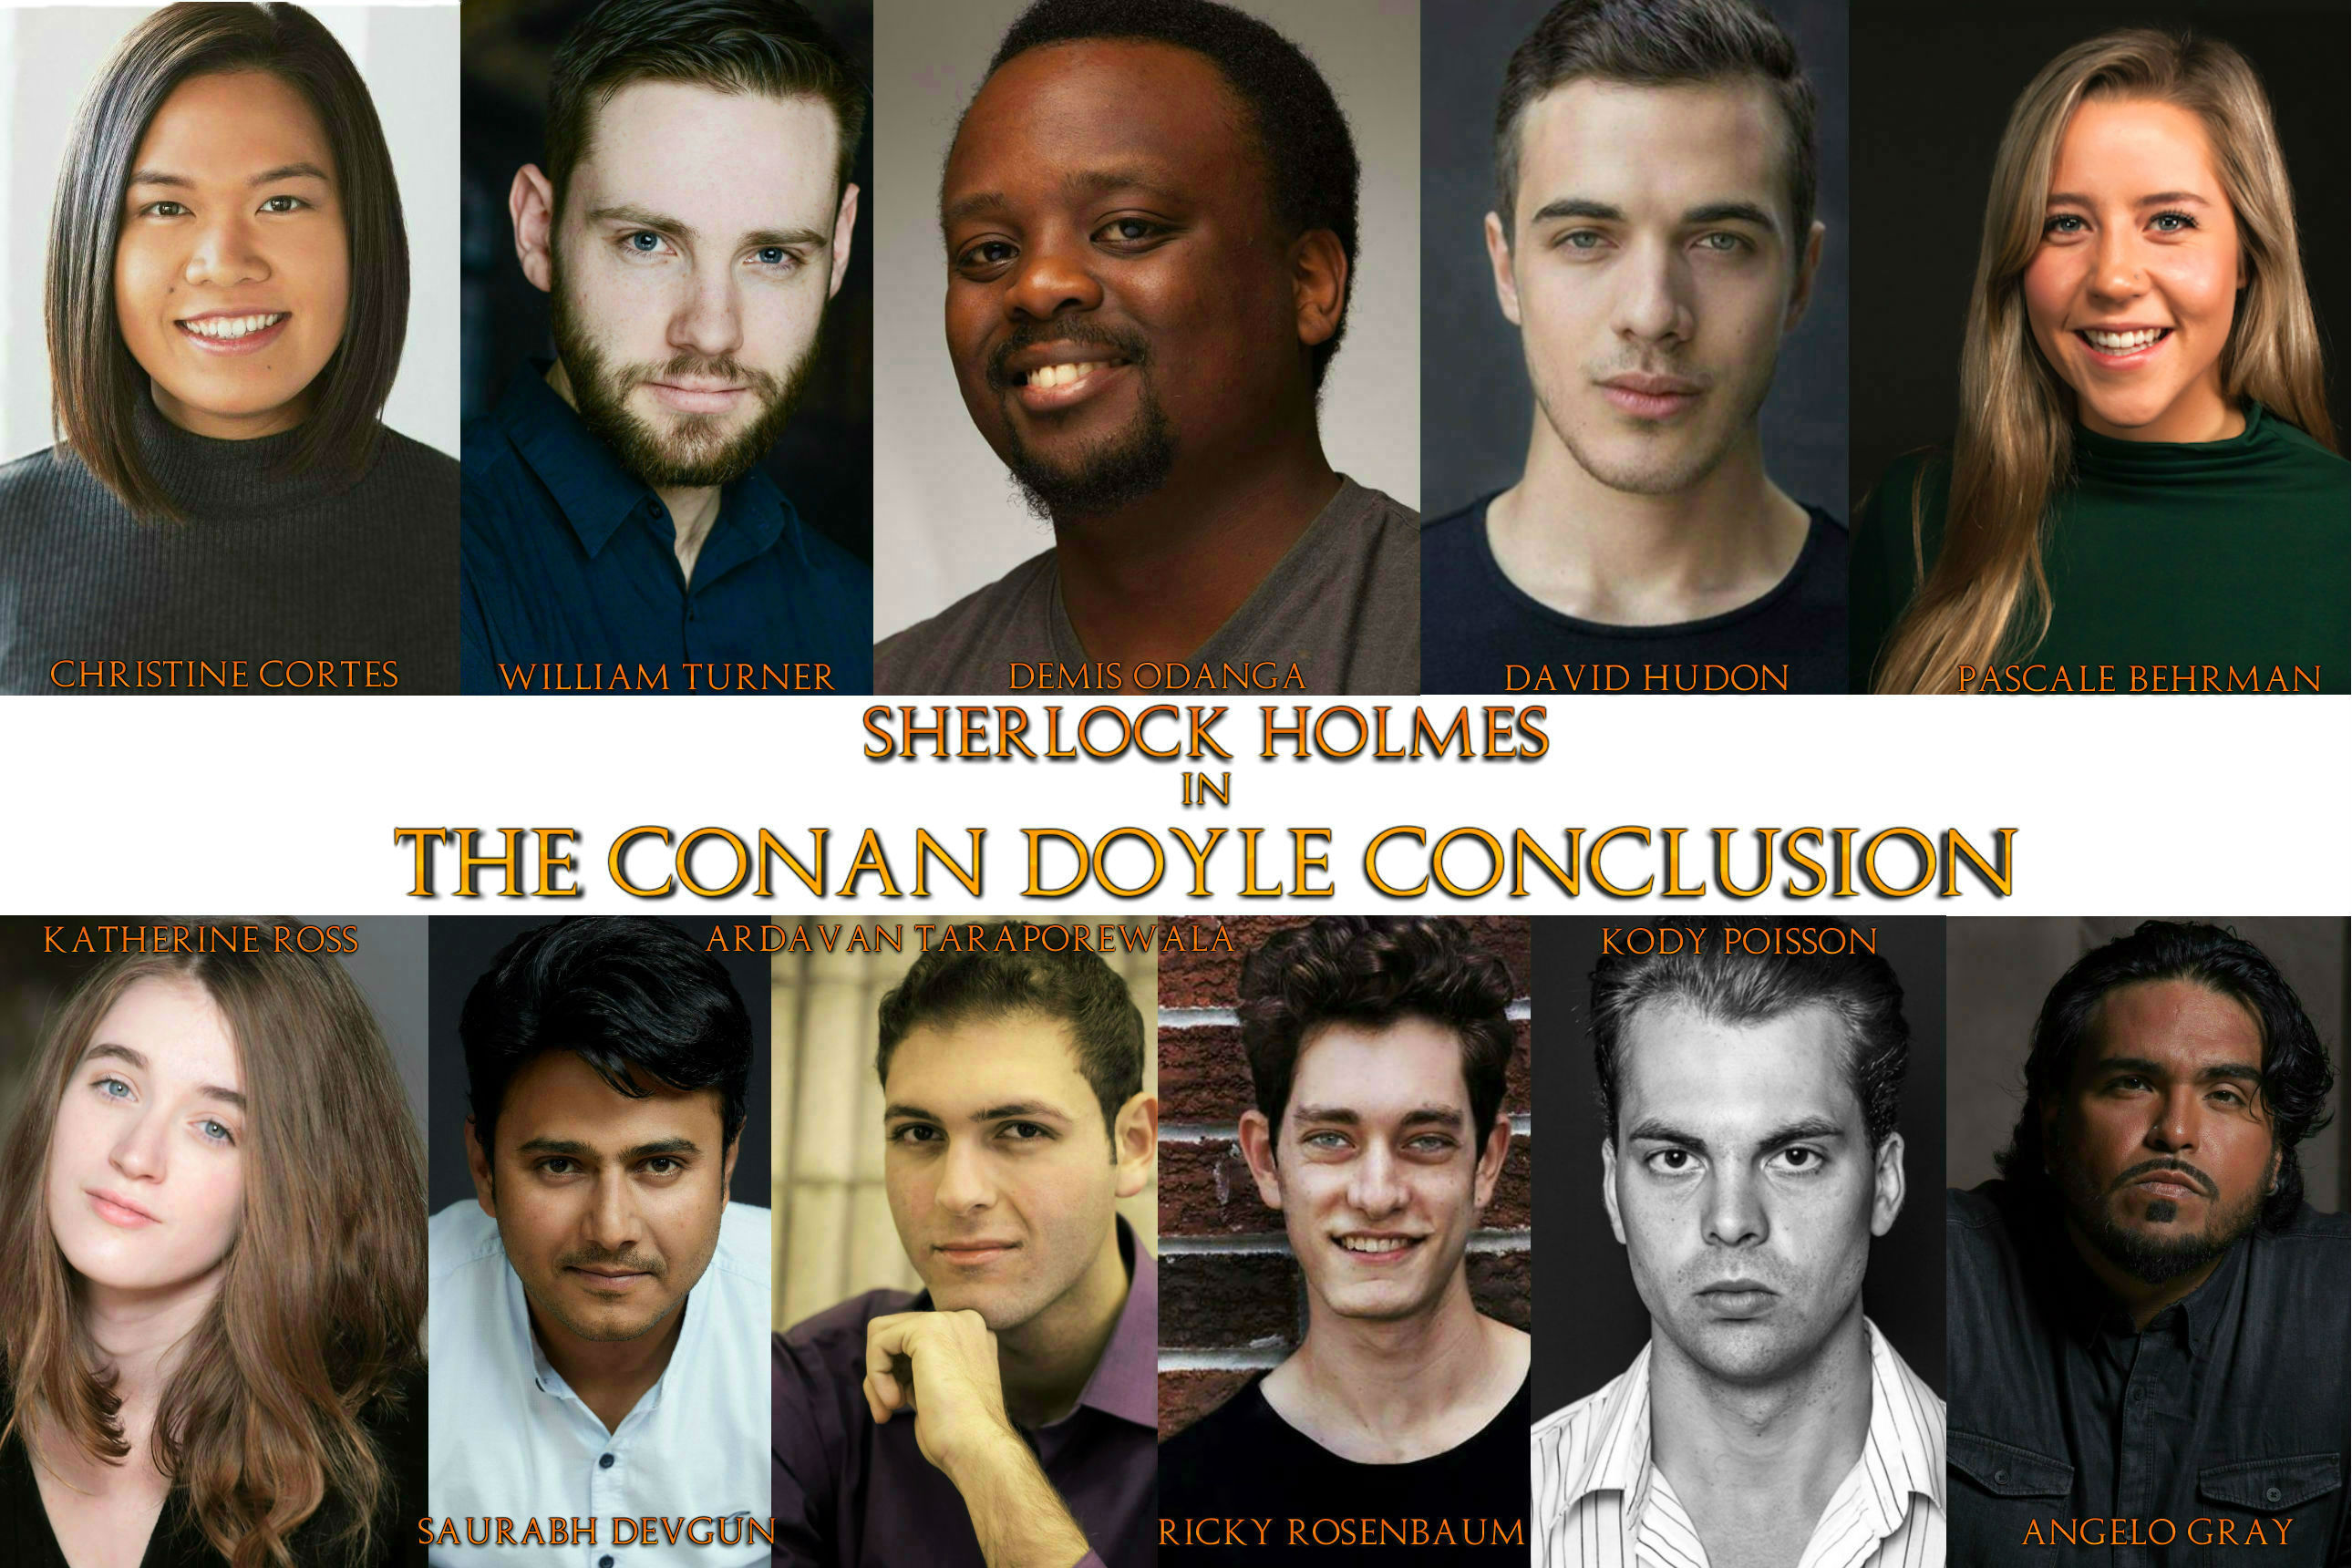 The Cast of The Conan Doyle Conclusion